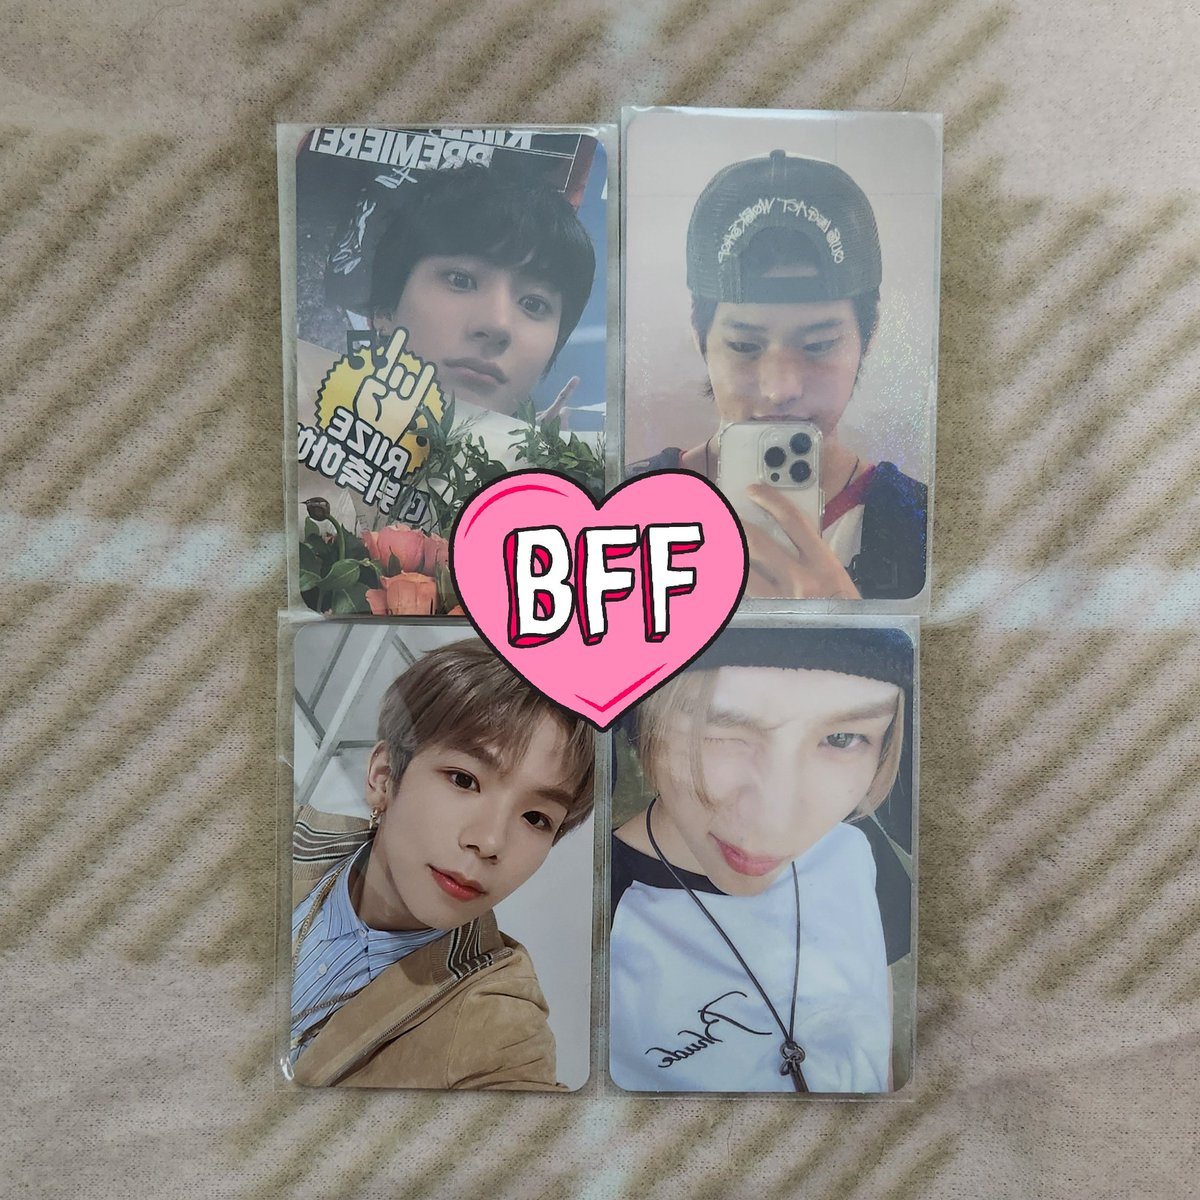 wts lfb riize ph

🛍️ riize pc set (all 4)
→ P730 + isf
→ pf and local sf tbf
→ from yangdo, payo to secure
→ under FETA !

reply mine + member or dm to claim!

t. wonbin sungchan seunghan sohee eunseok shotaro anton pc poca